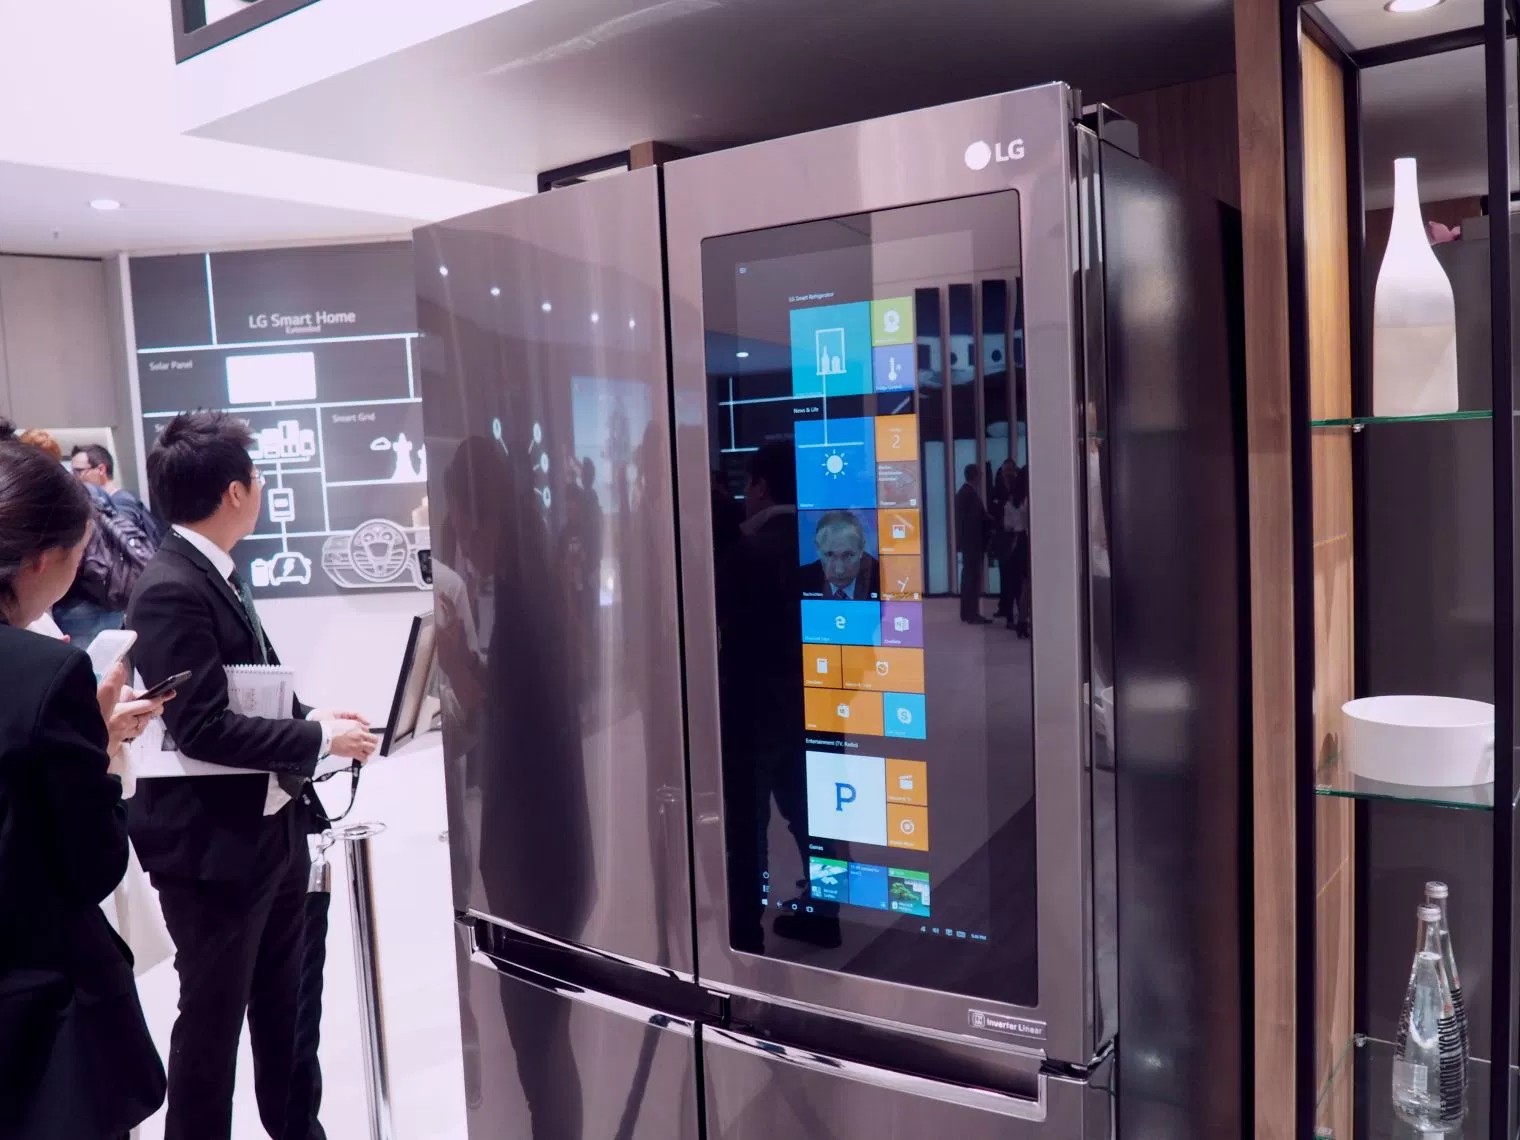 LG new Windows 10 smart refrigerator could be controlled via a Windows 10 laptop